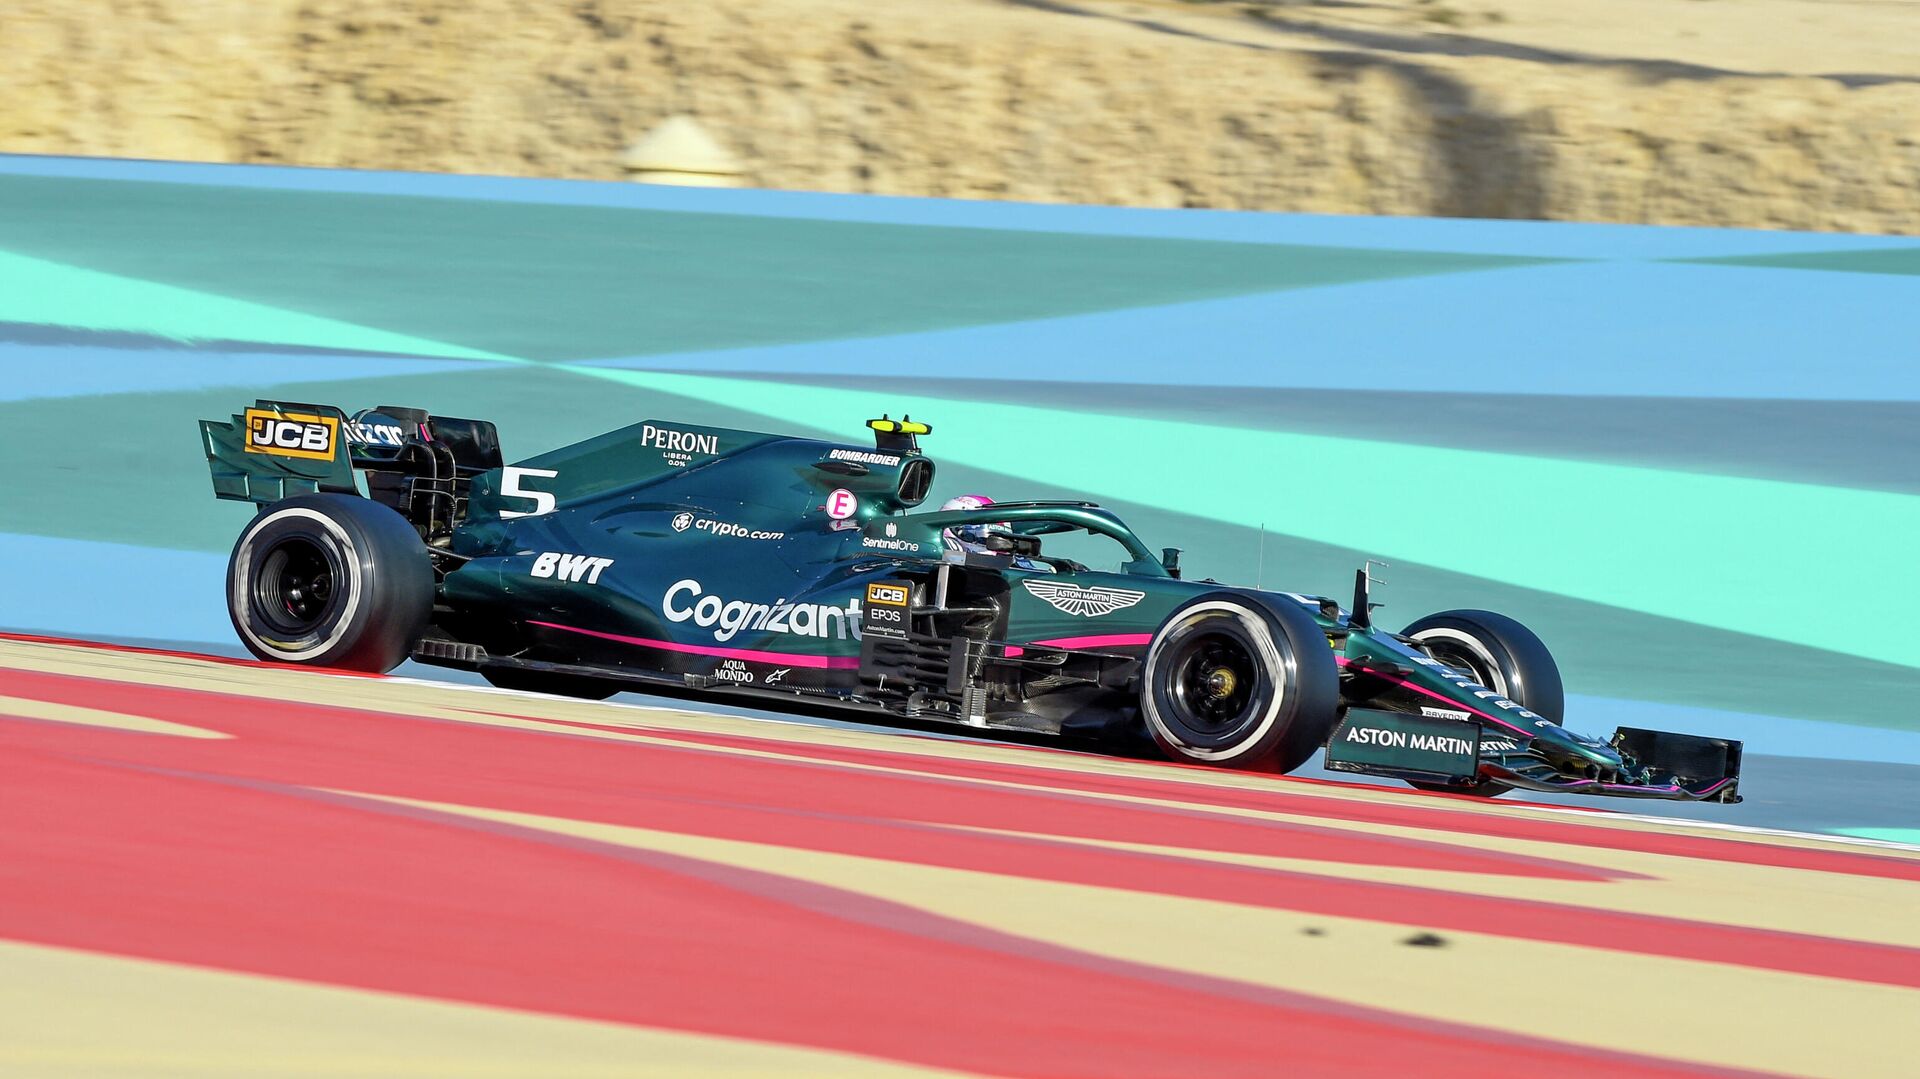 Aston Martin's German driver Sebastian Vettel drives during the third day of the Formula One (F1) pre-season testing at the Bahrain International Circuit in the city of Sakhir on March 14, 2021. (Photo by Mazen MAHDI / AFP) - РИА Новости, 1920, 25.03.2021